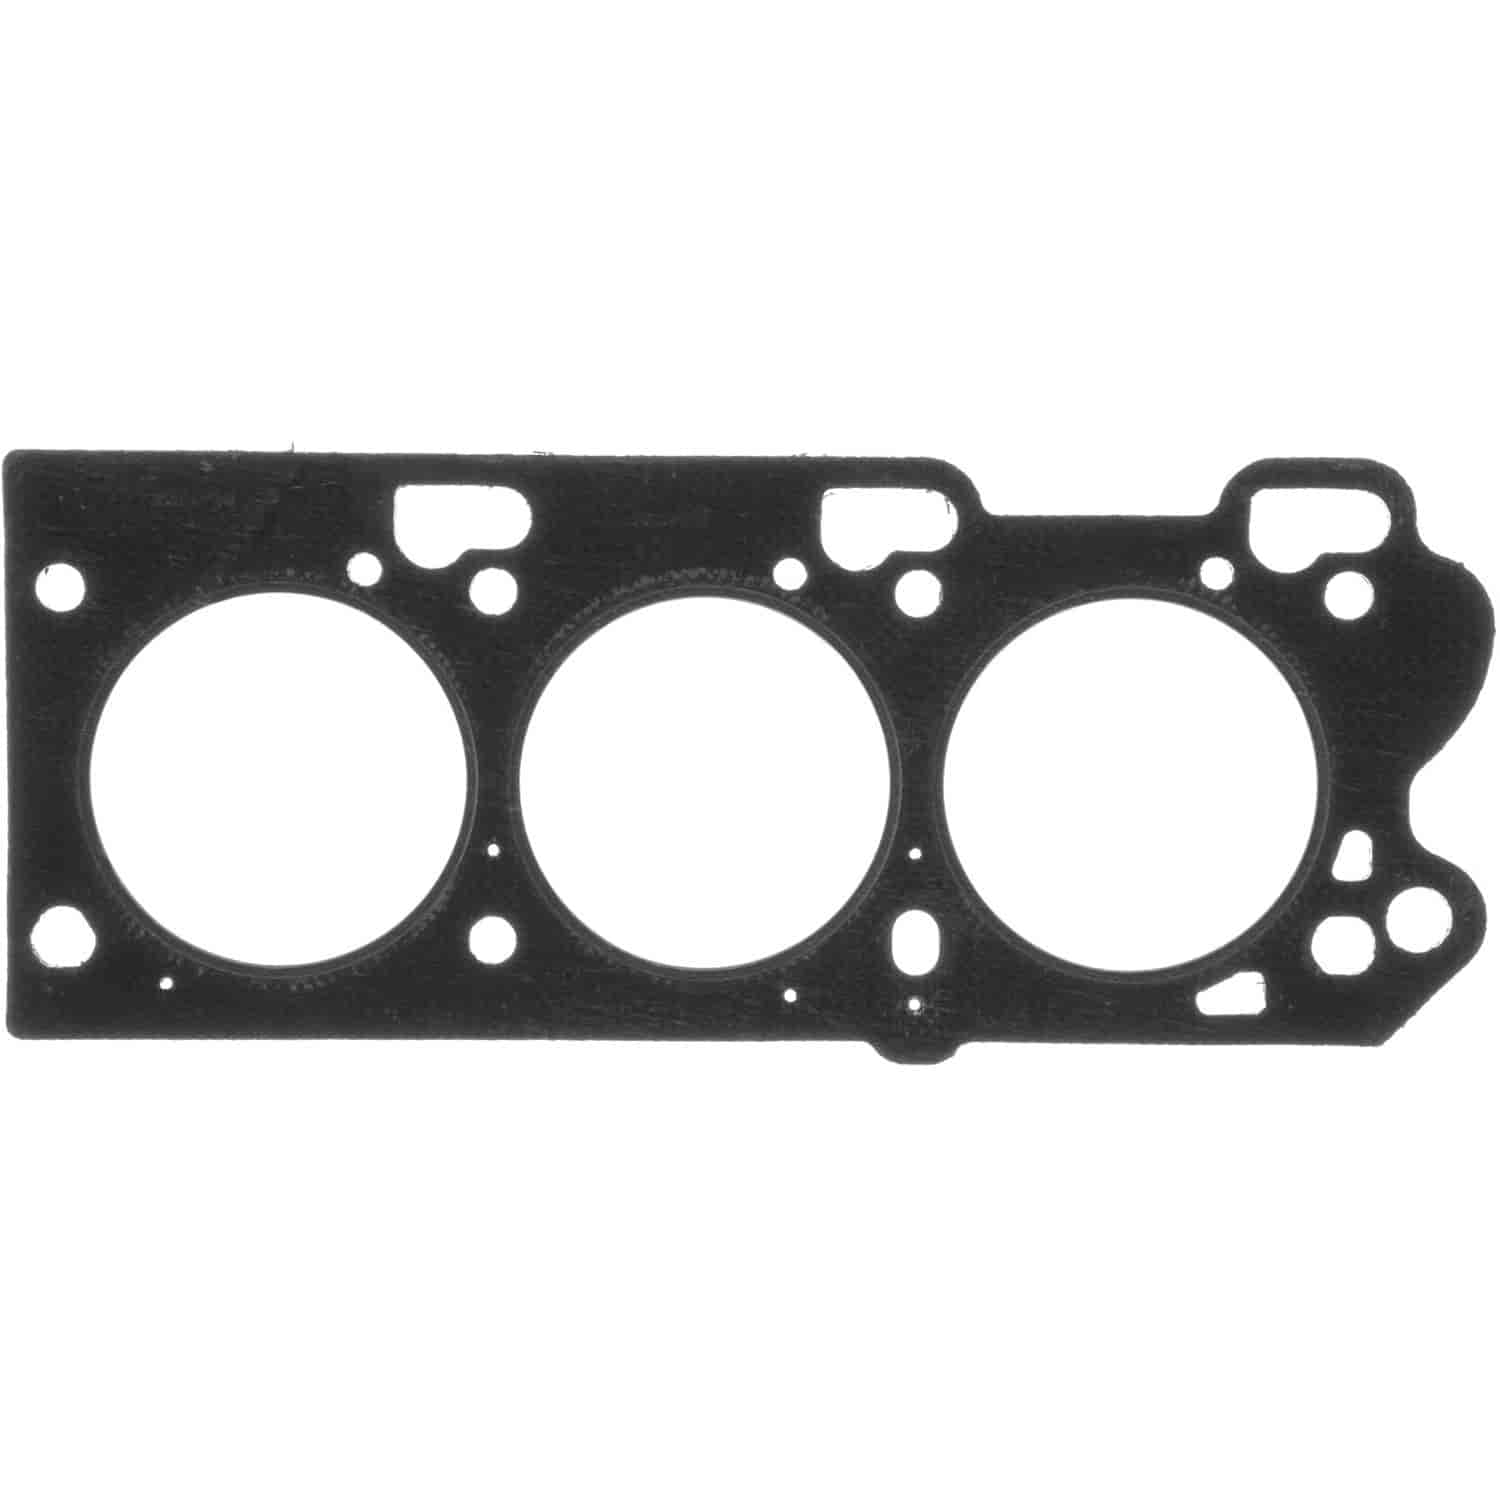 Cylinder Head Gasket Right Chry-Pass 197CID 3.2L Eng.Concorde Intrepid 1998-2001.215CID 3.5L Eng.Conc